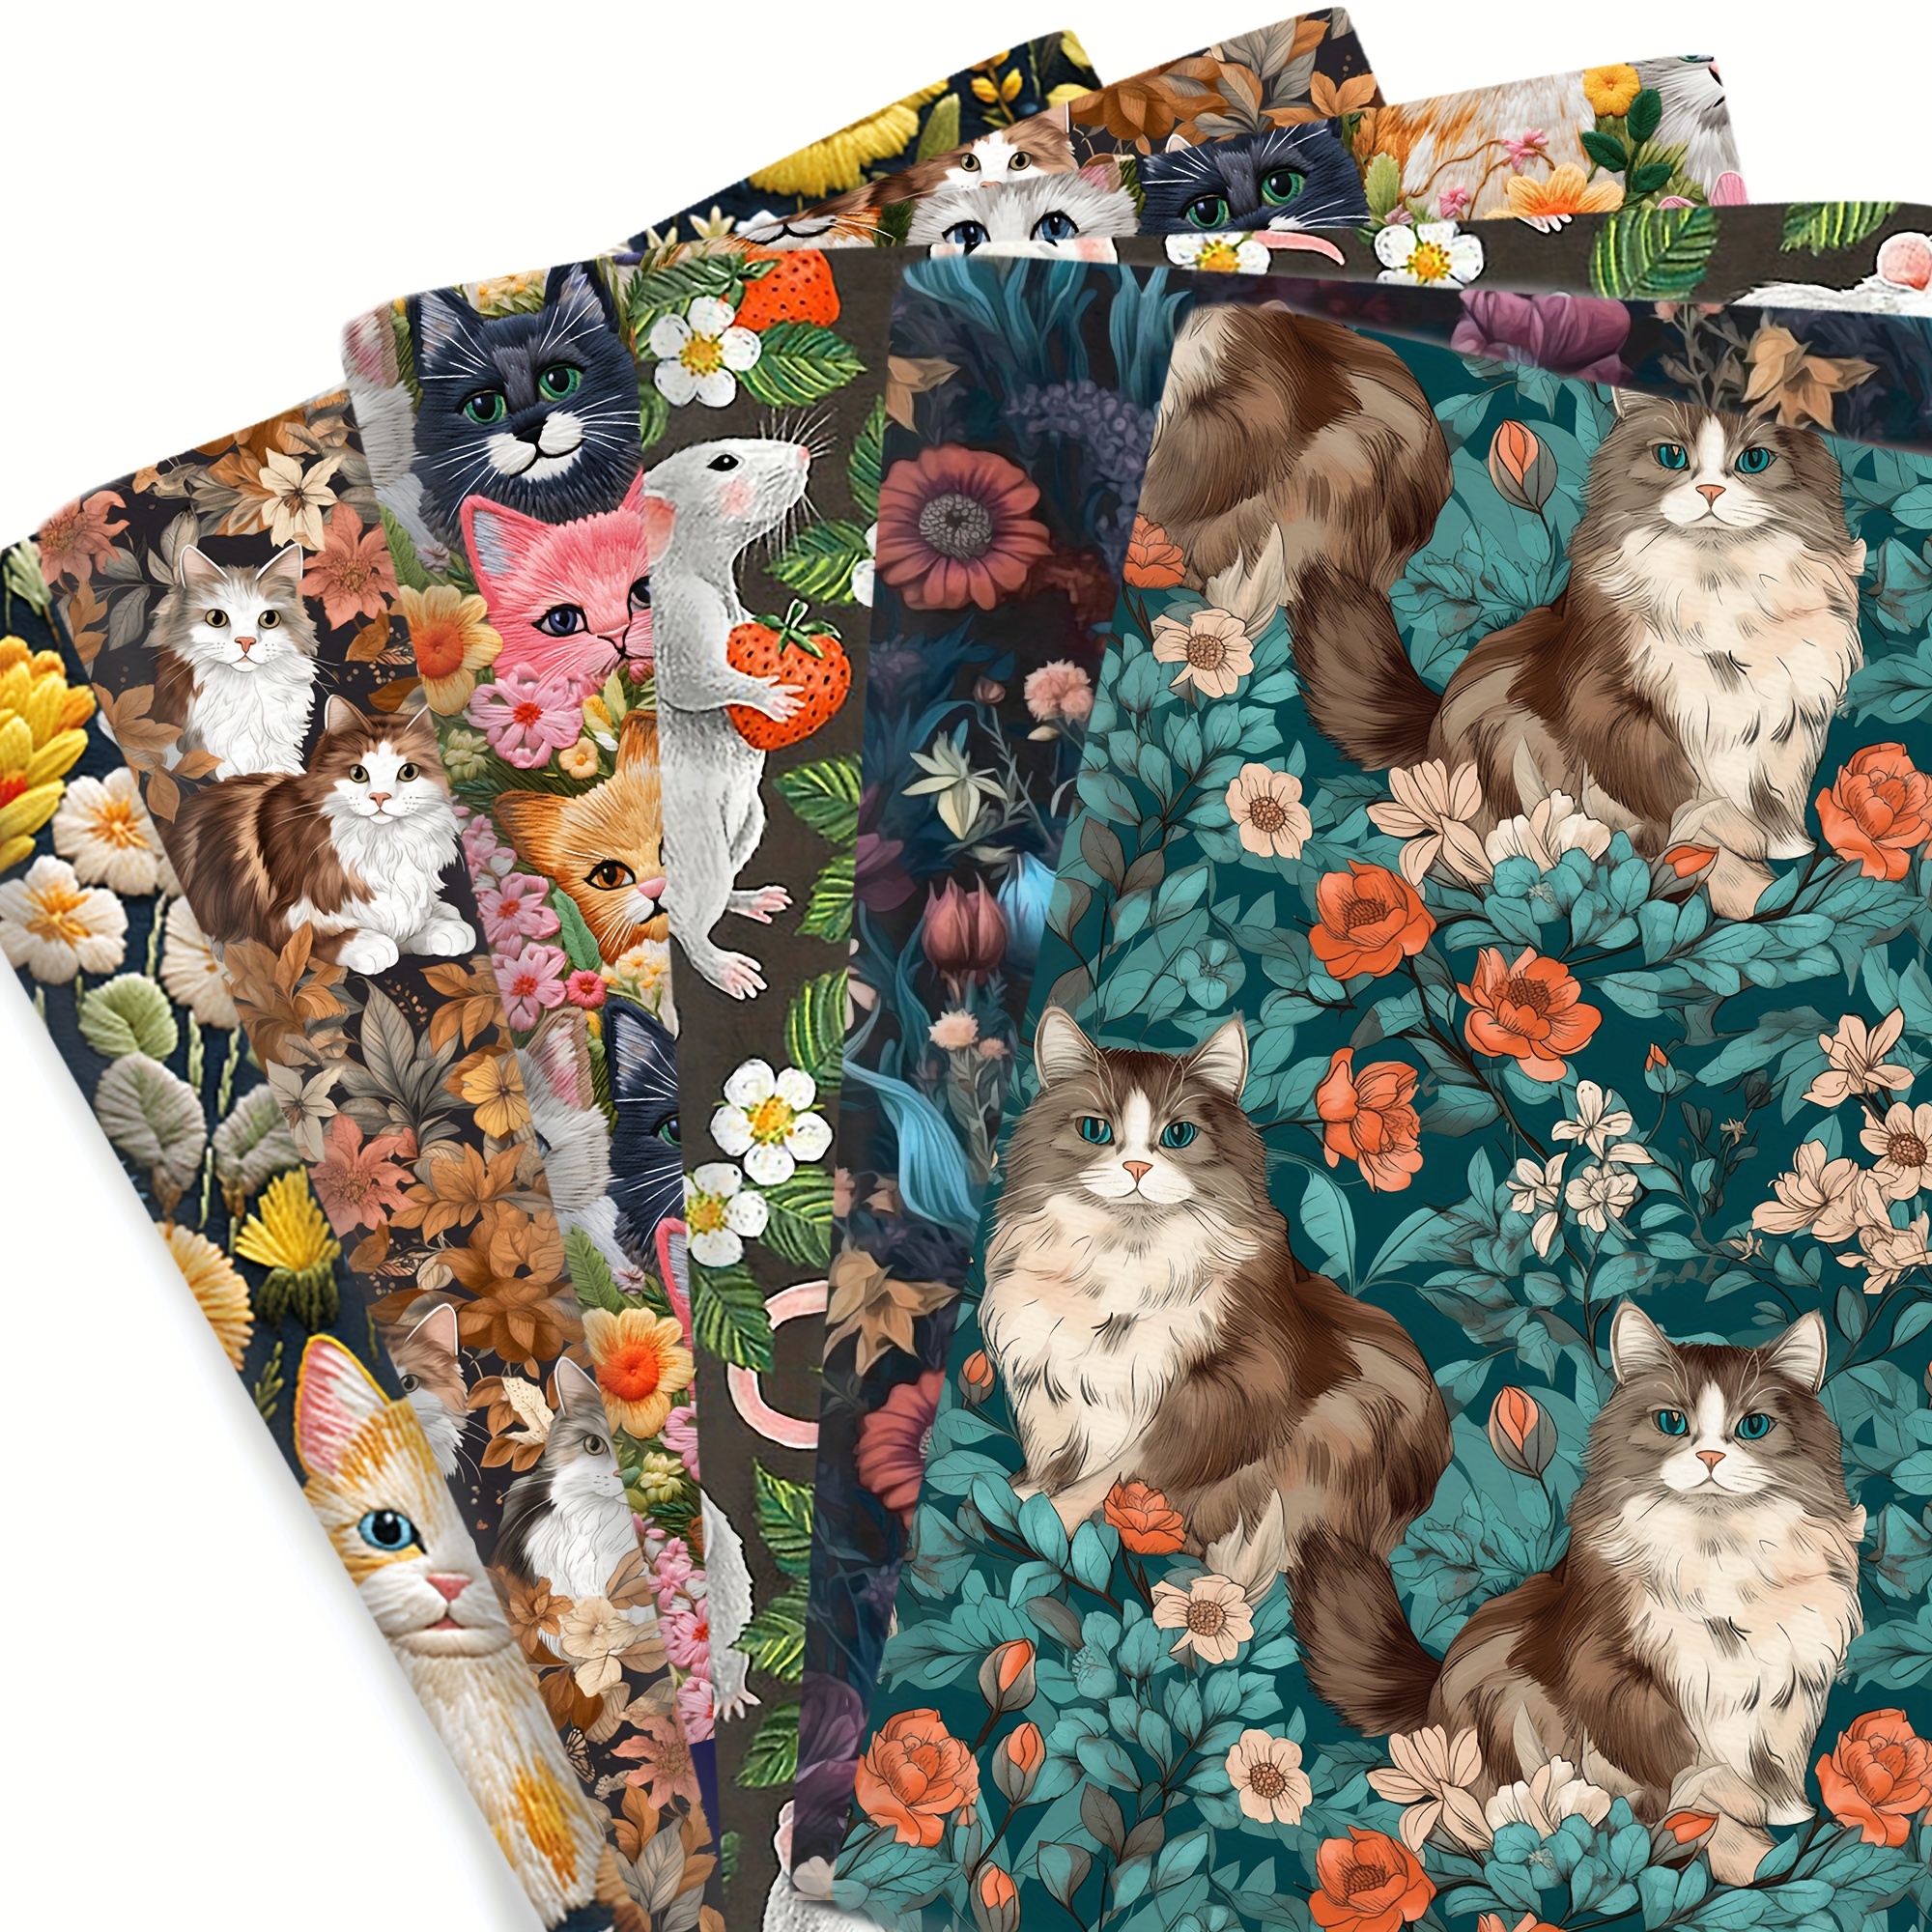 

1pc Polyester Cotton Fabric For Patchwork Sewing Quilting Needlework Fabrics Imitation Embroidery Lace Pattern-like 3d Printed Flowers Cat Animals Series